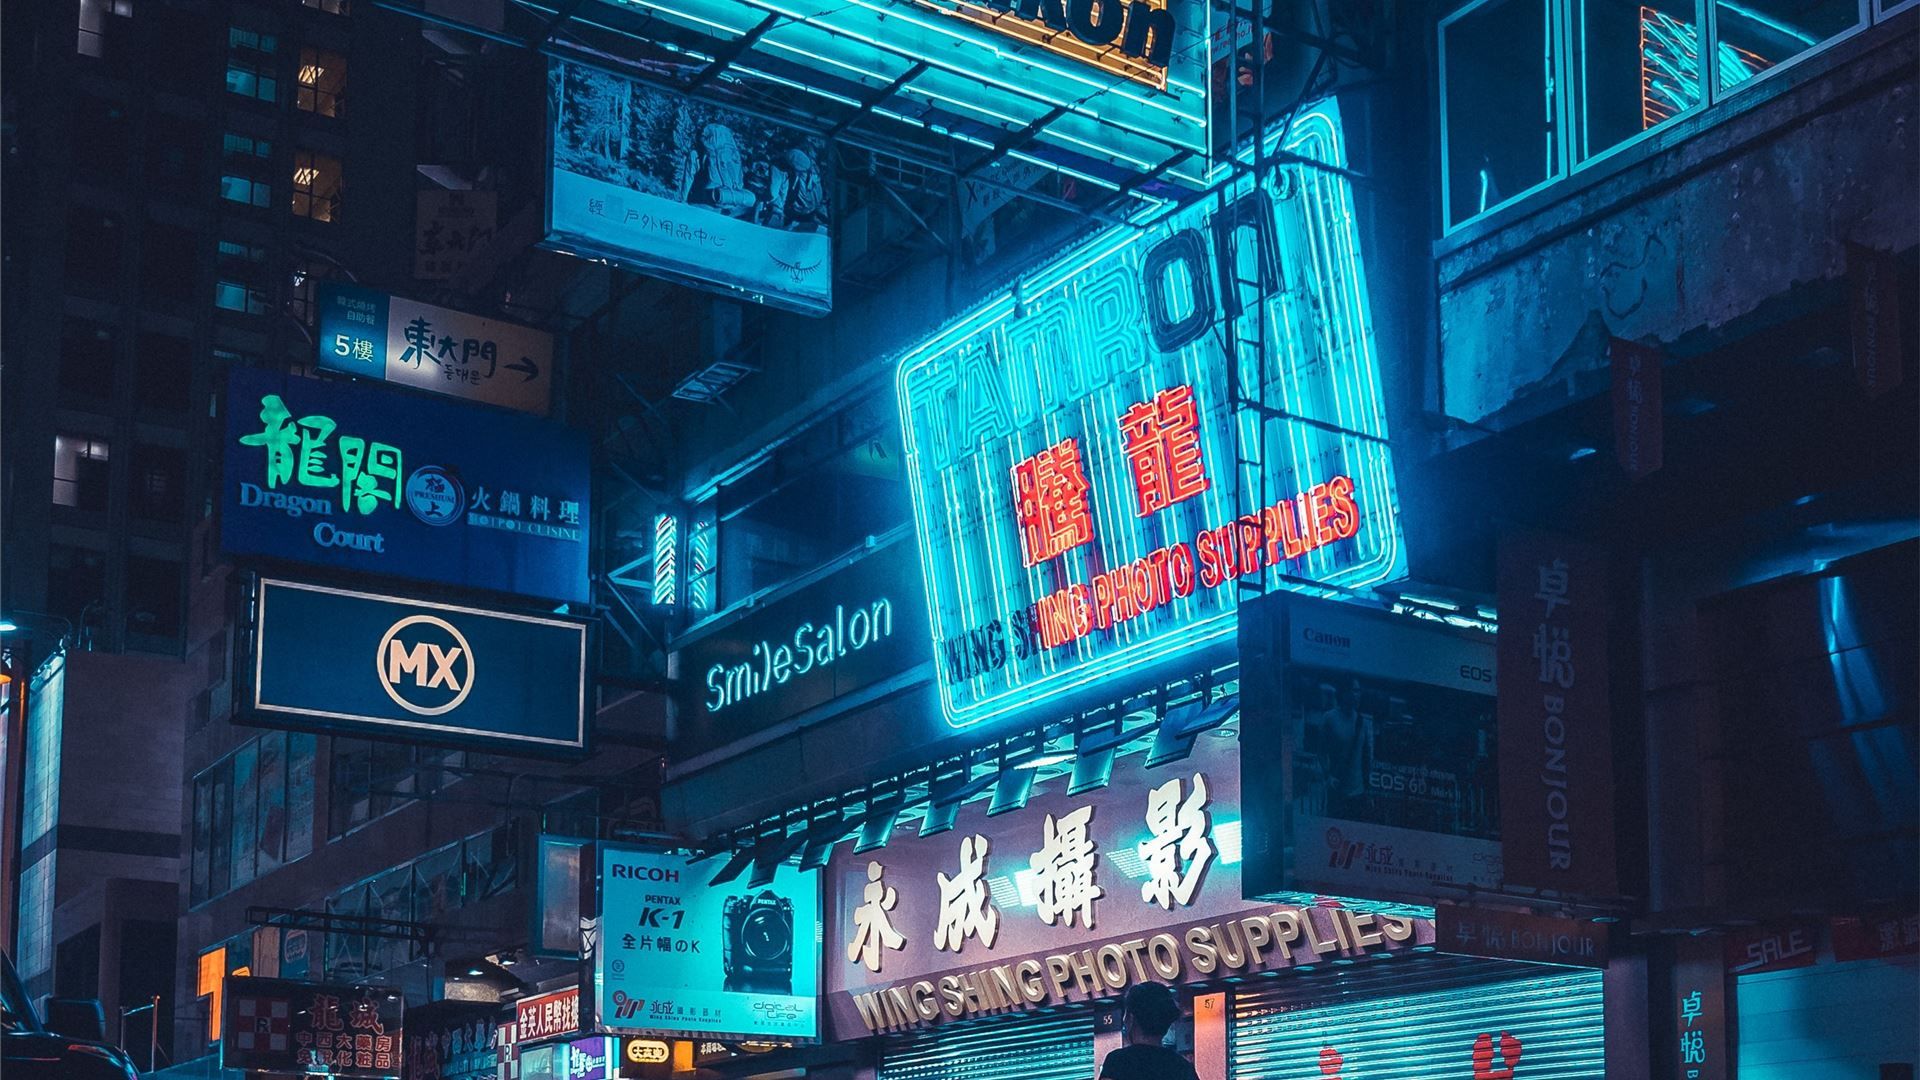 A street in Hong Kong at night with neon signs - Storm